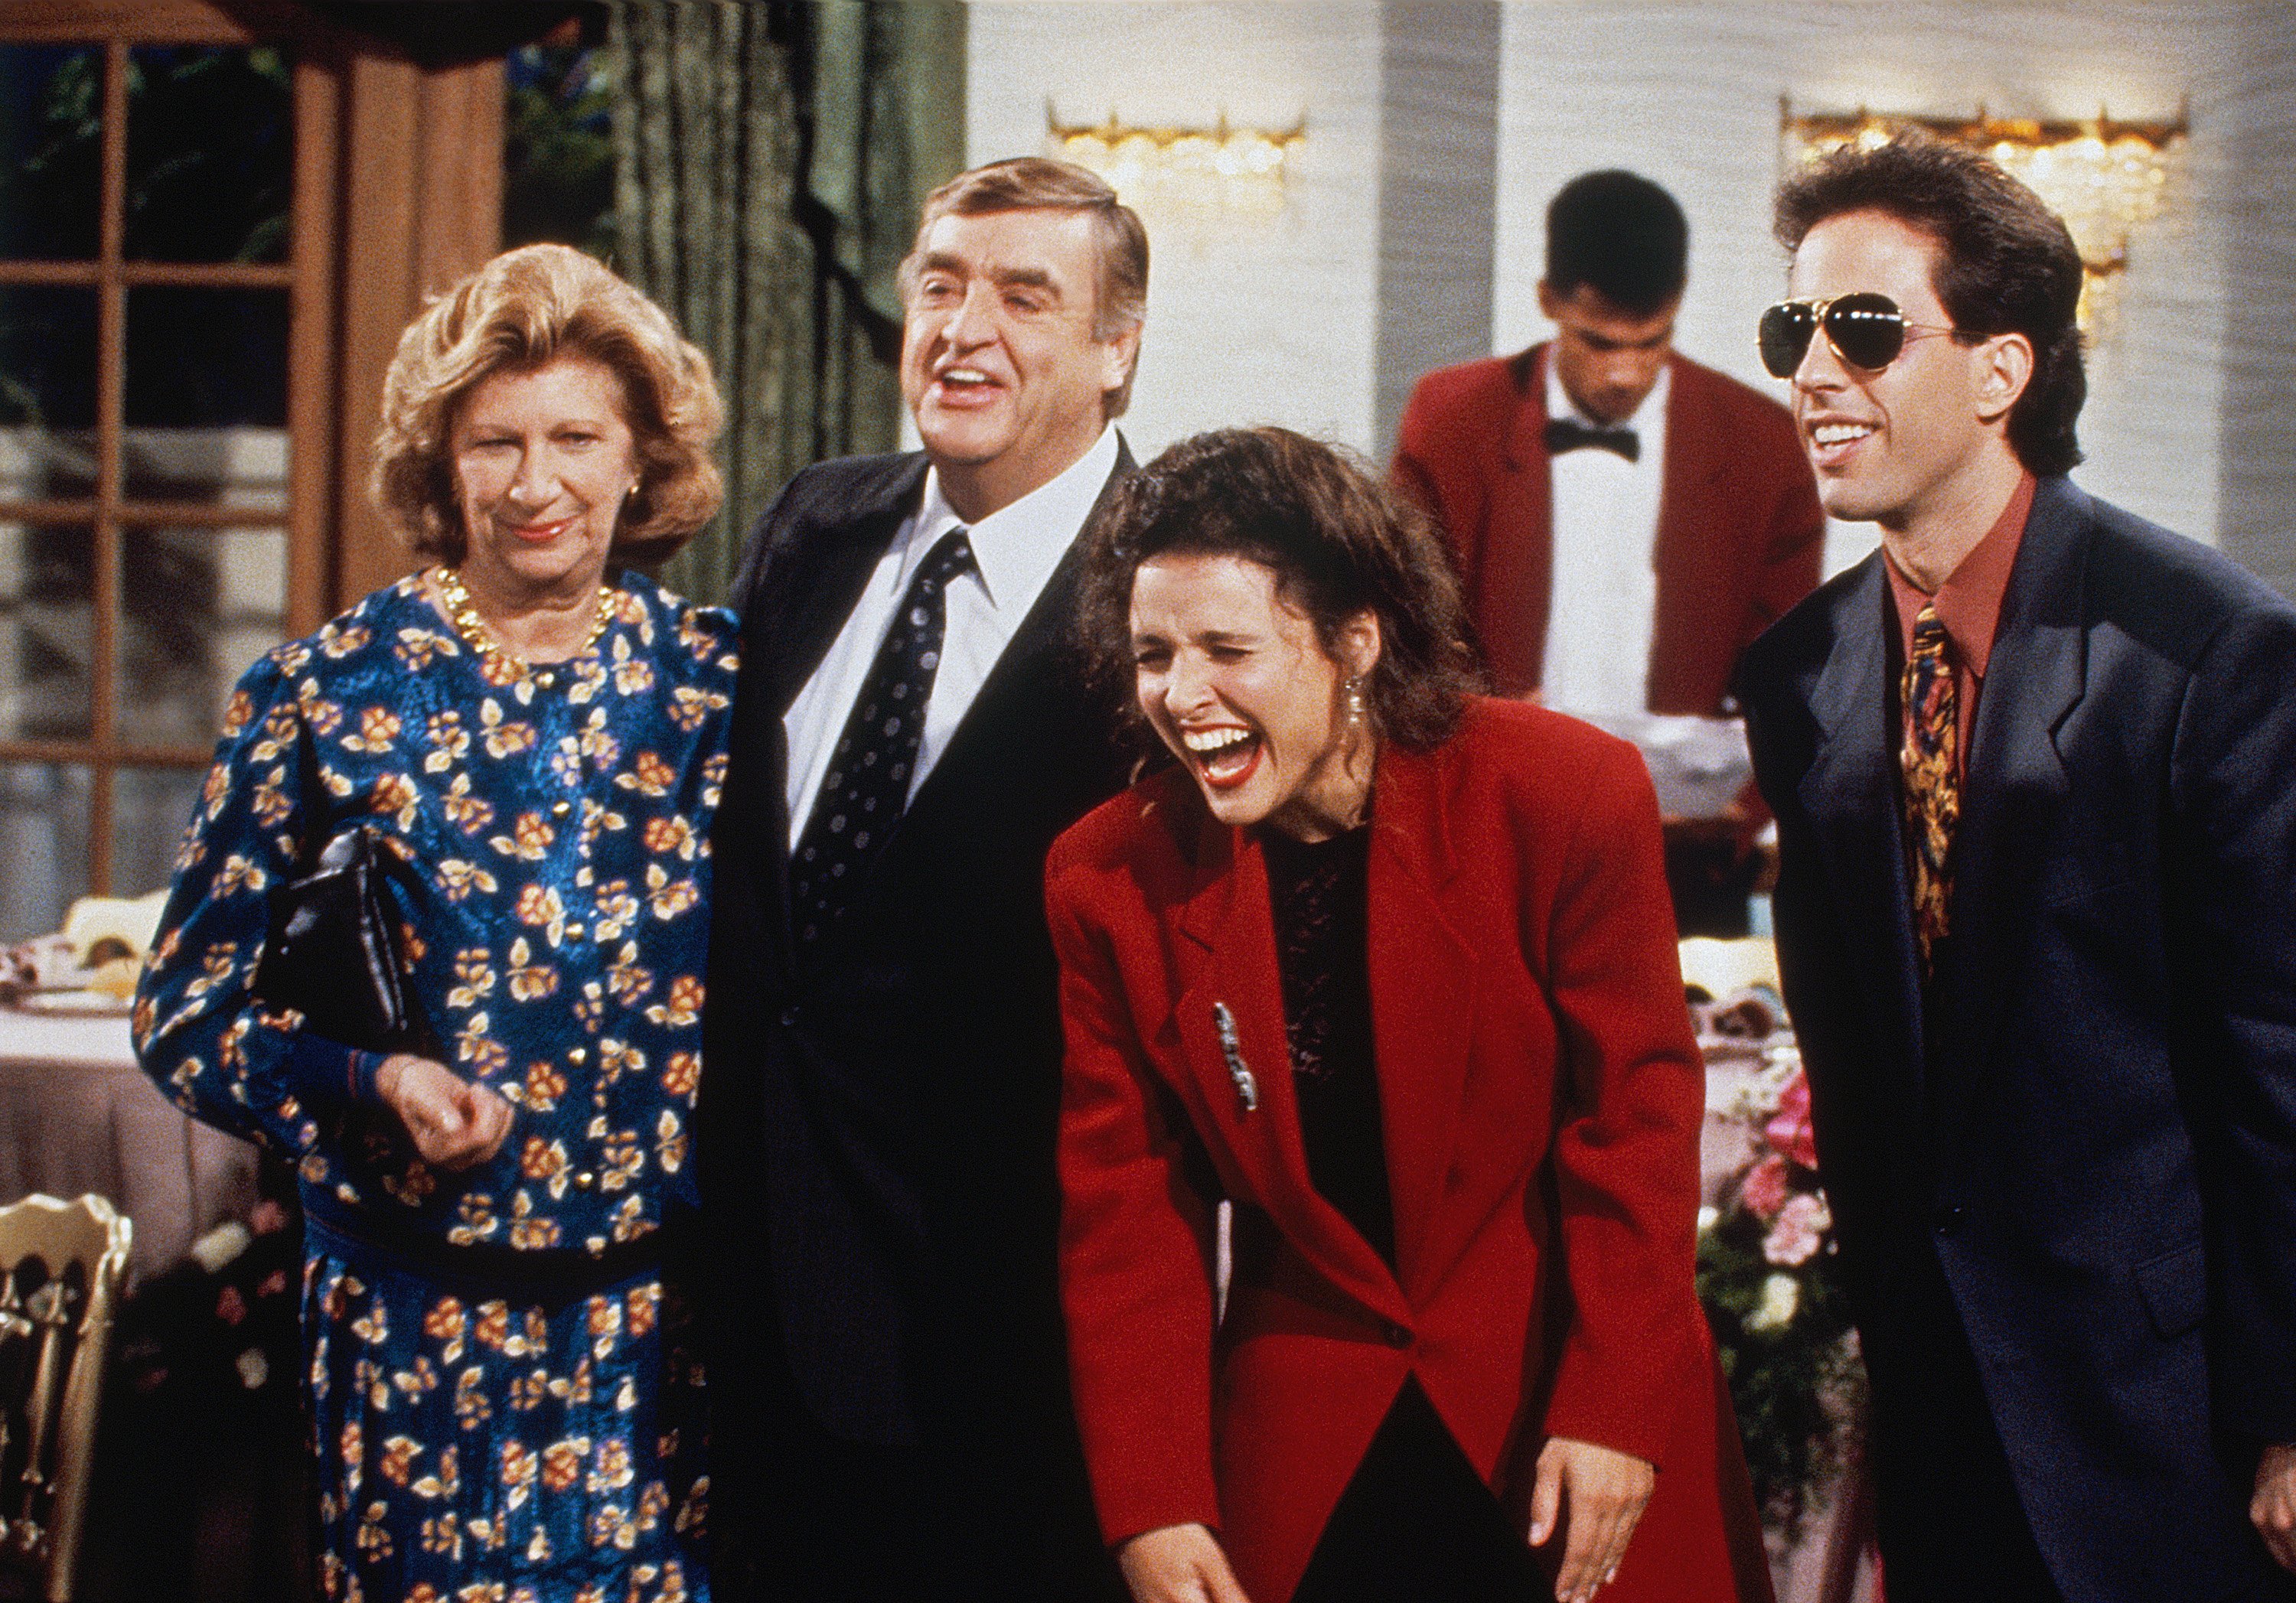 Elaine Benes in 'The Pen' for 'Seinfeld' bending over laughing in red blazer